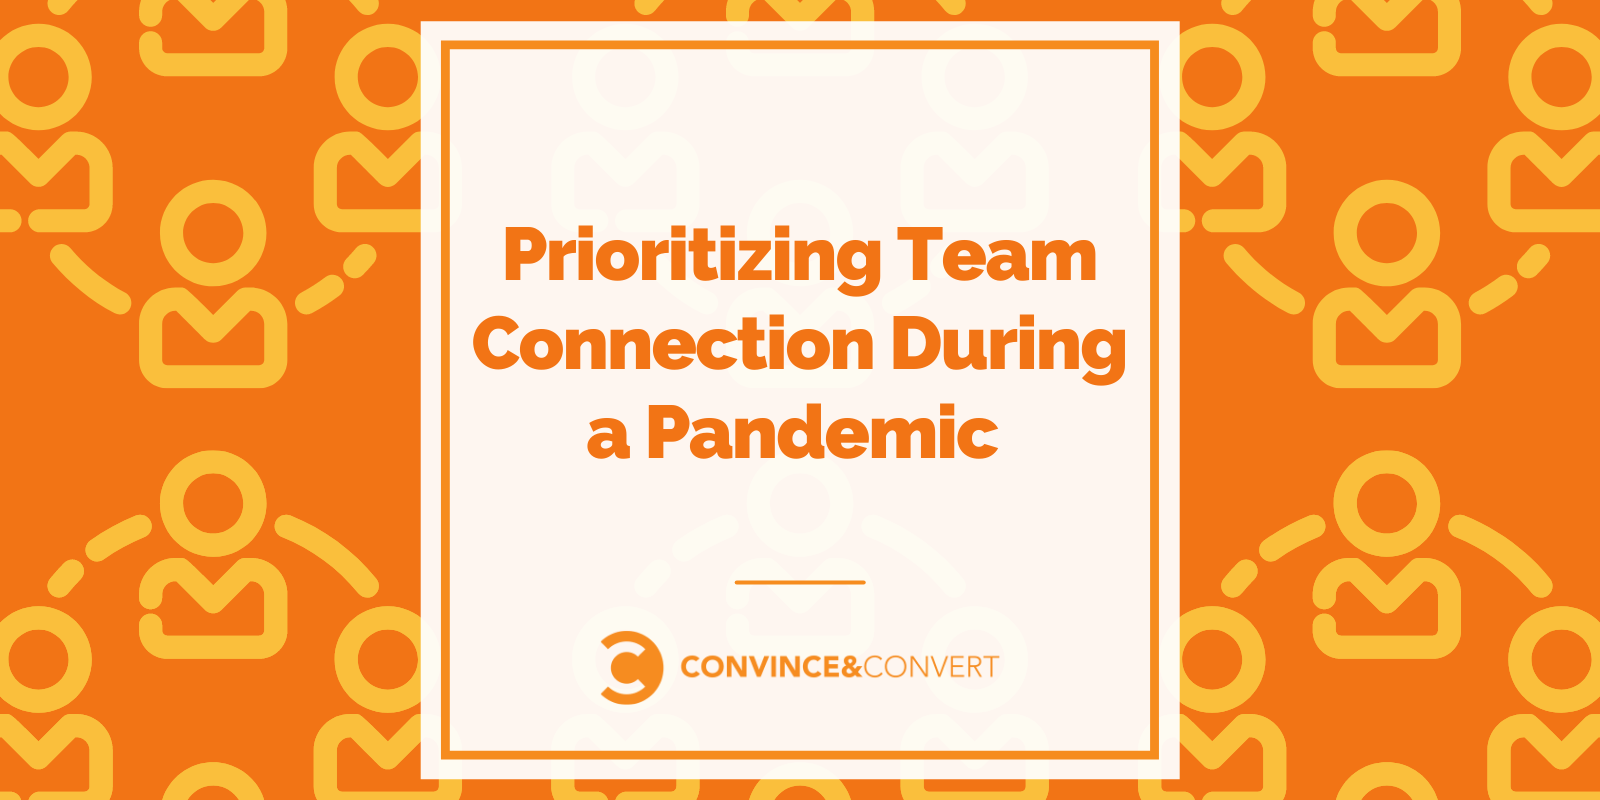 Prioritizing Team Connection During a Pandemic